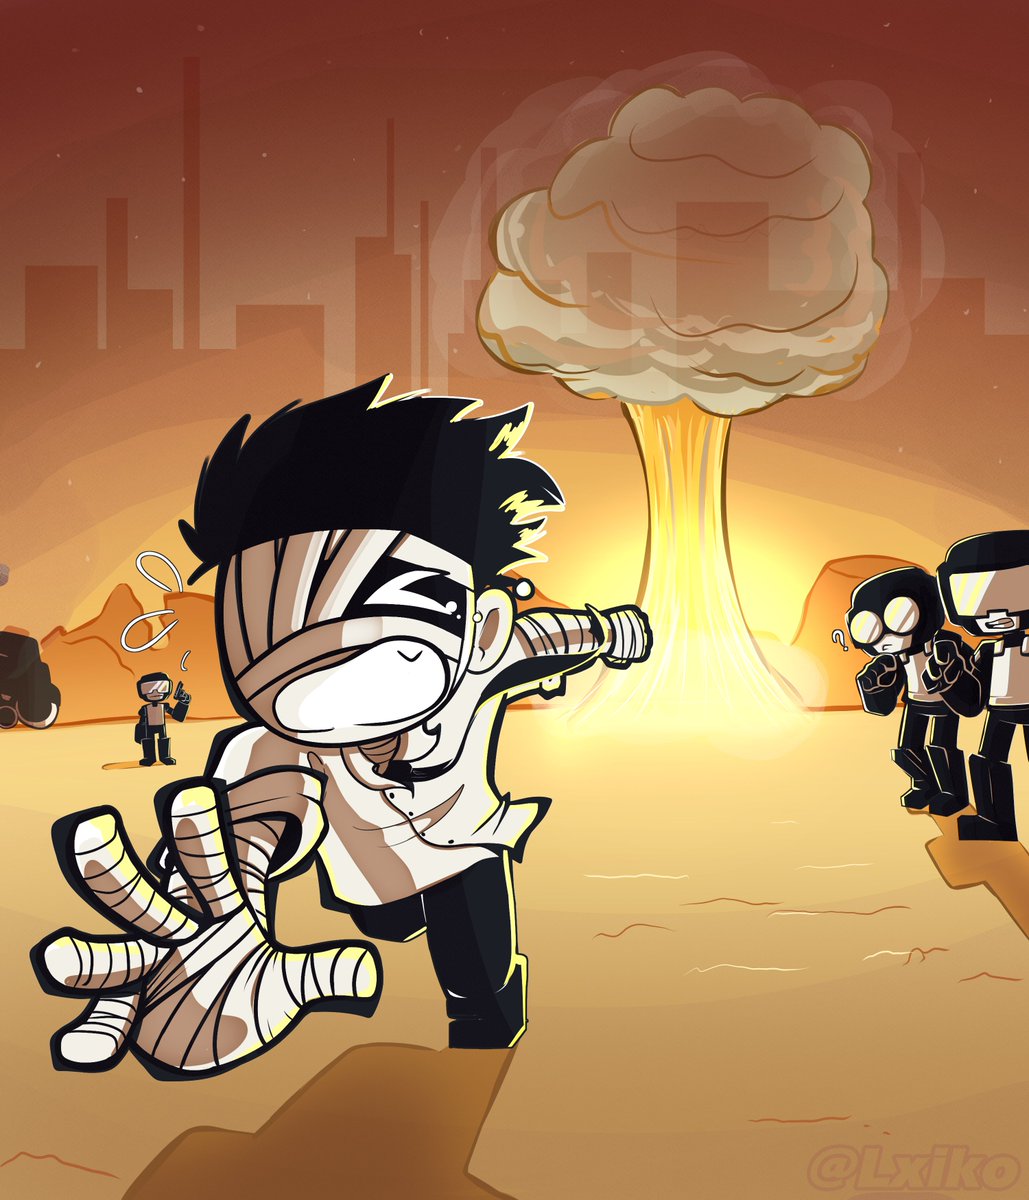 Not everybody is meant for war...
#Tankmen #NewGrounds